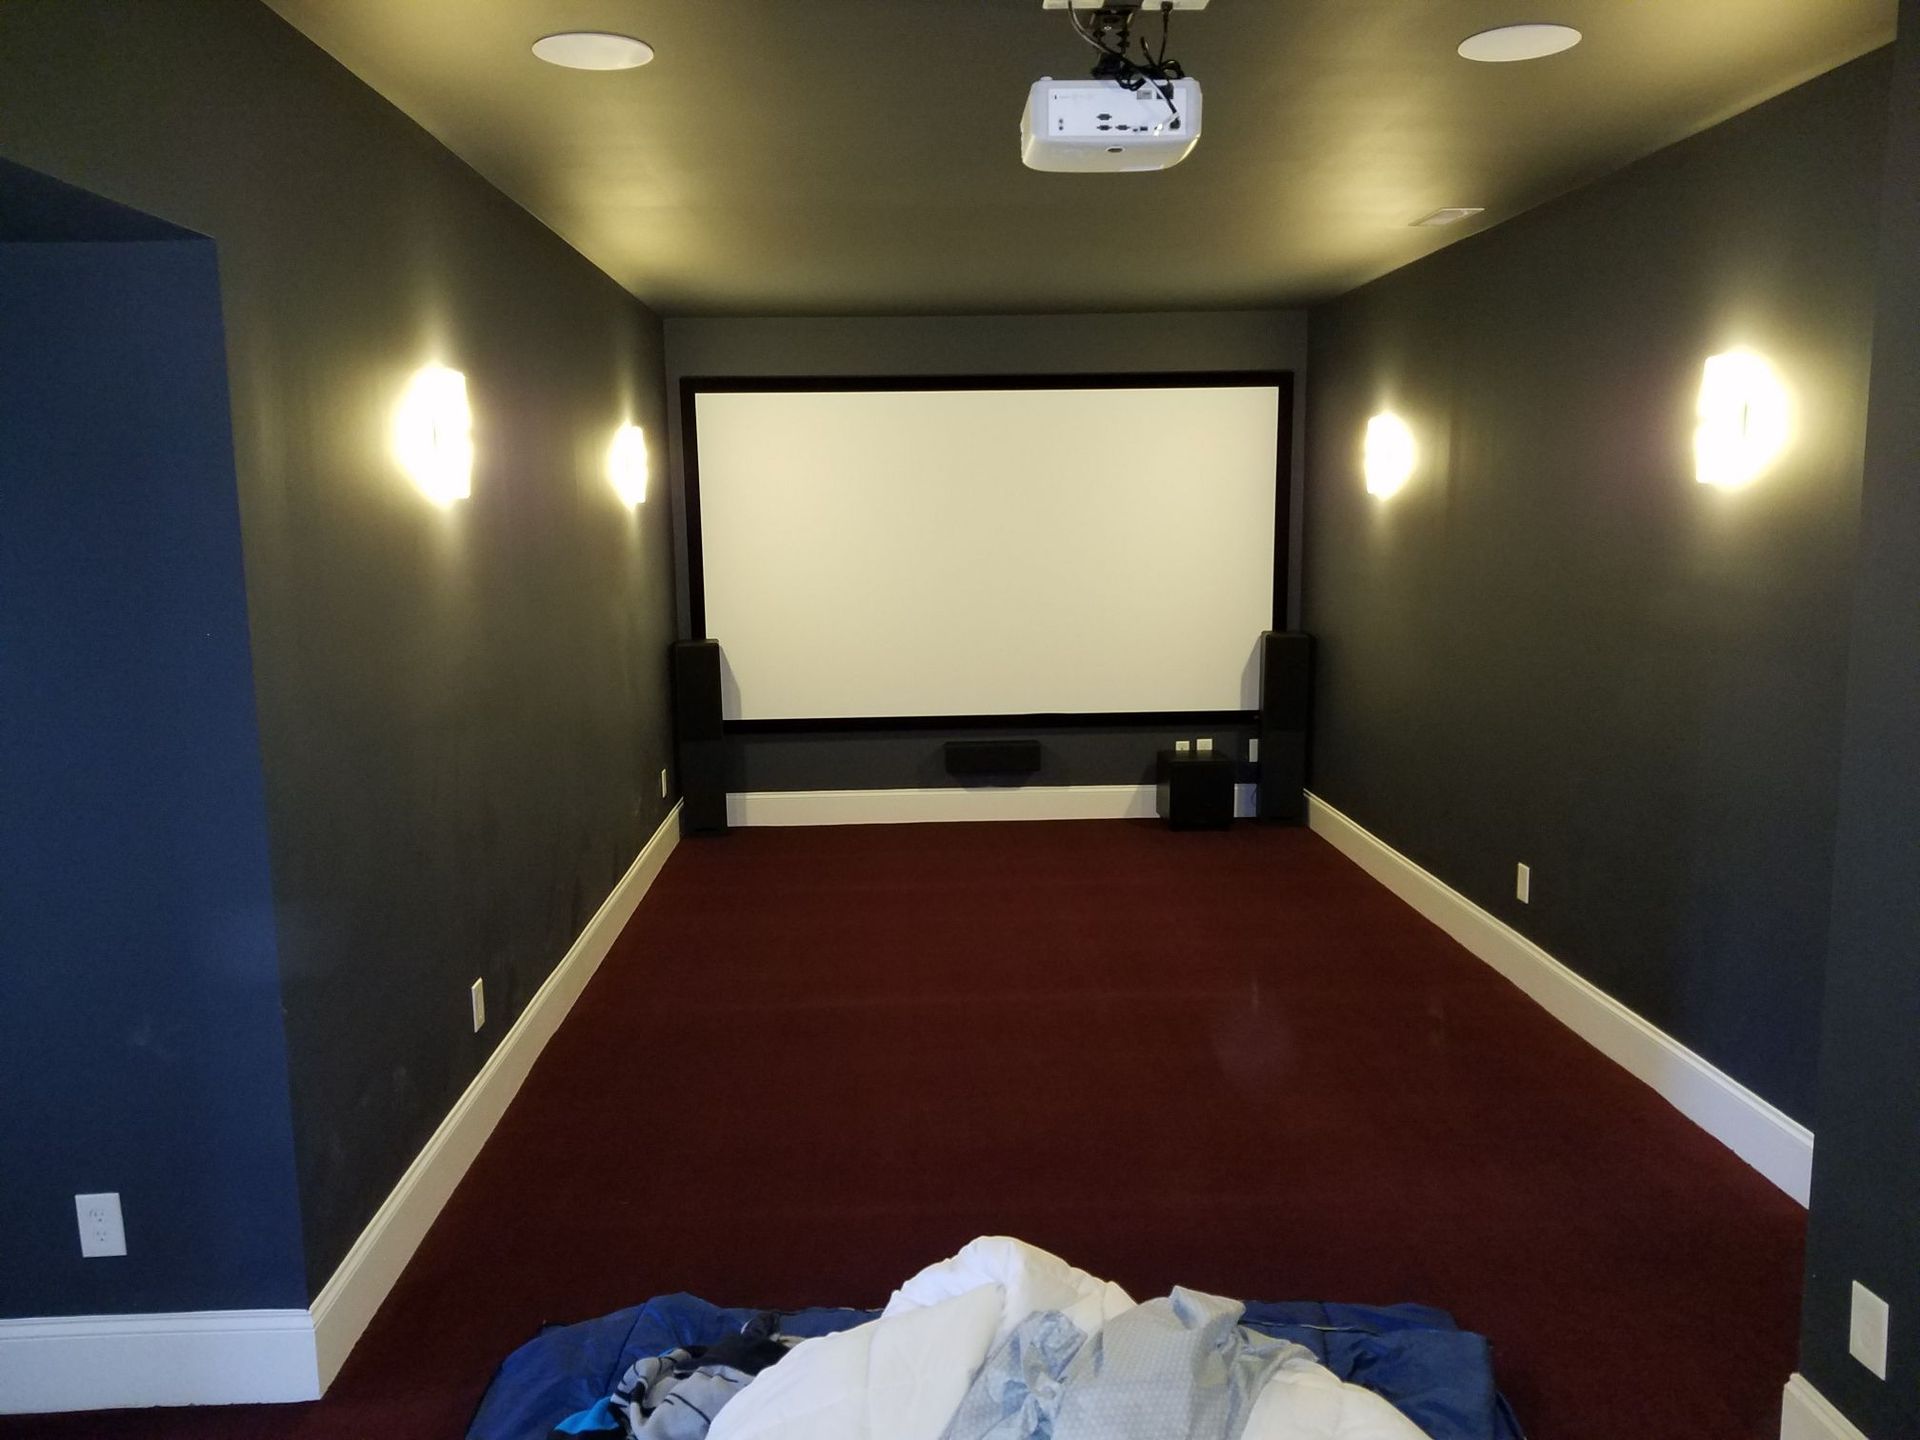 Creating a Theater Room Cary, NC